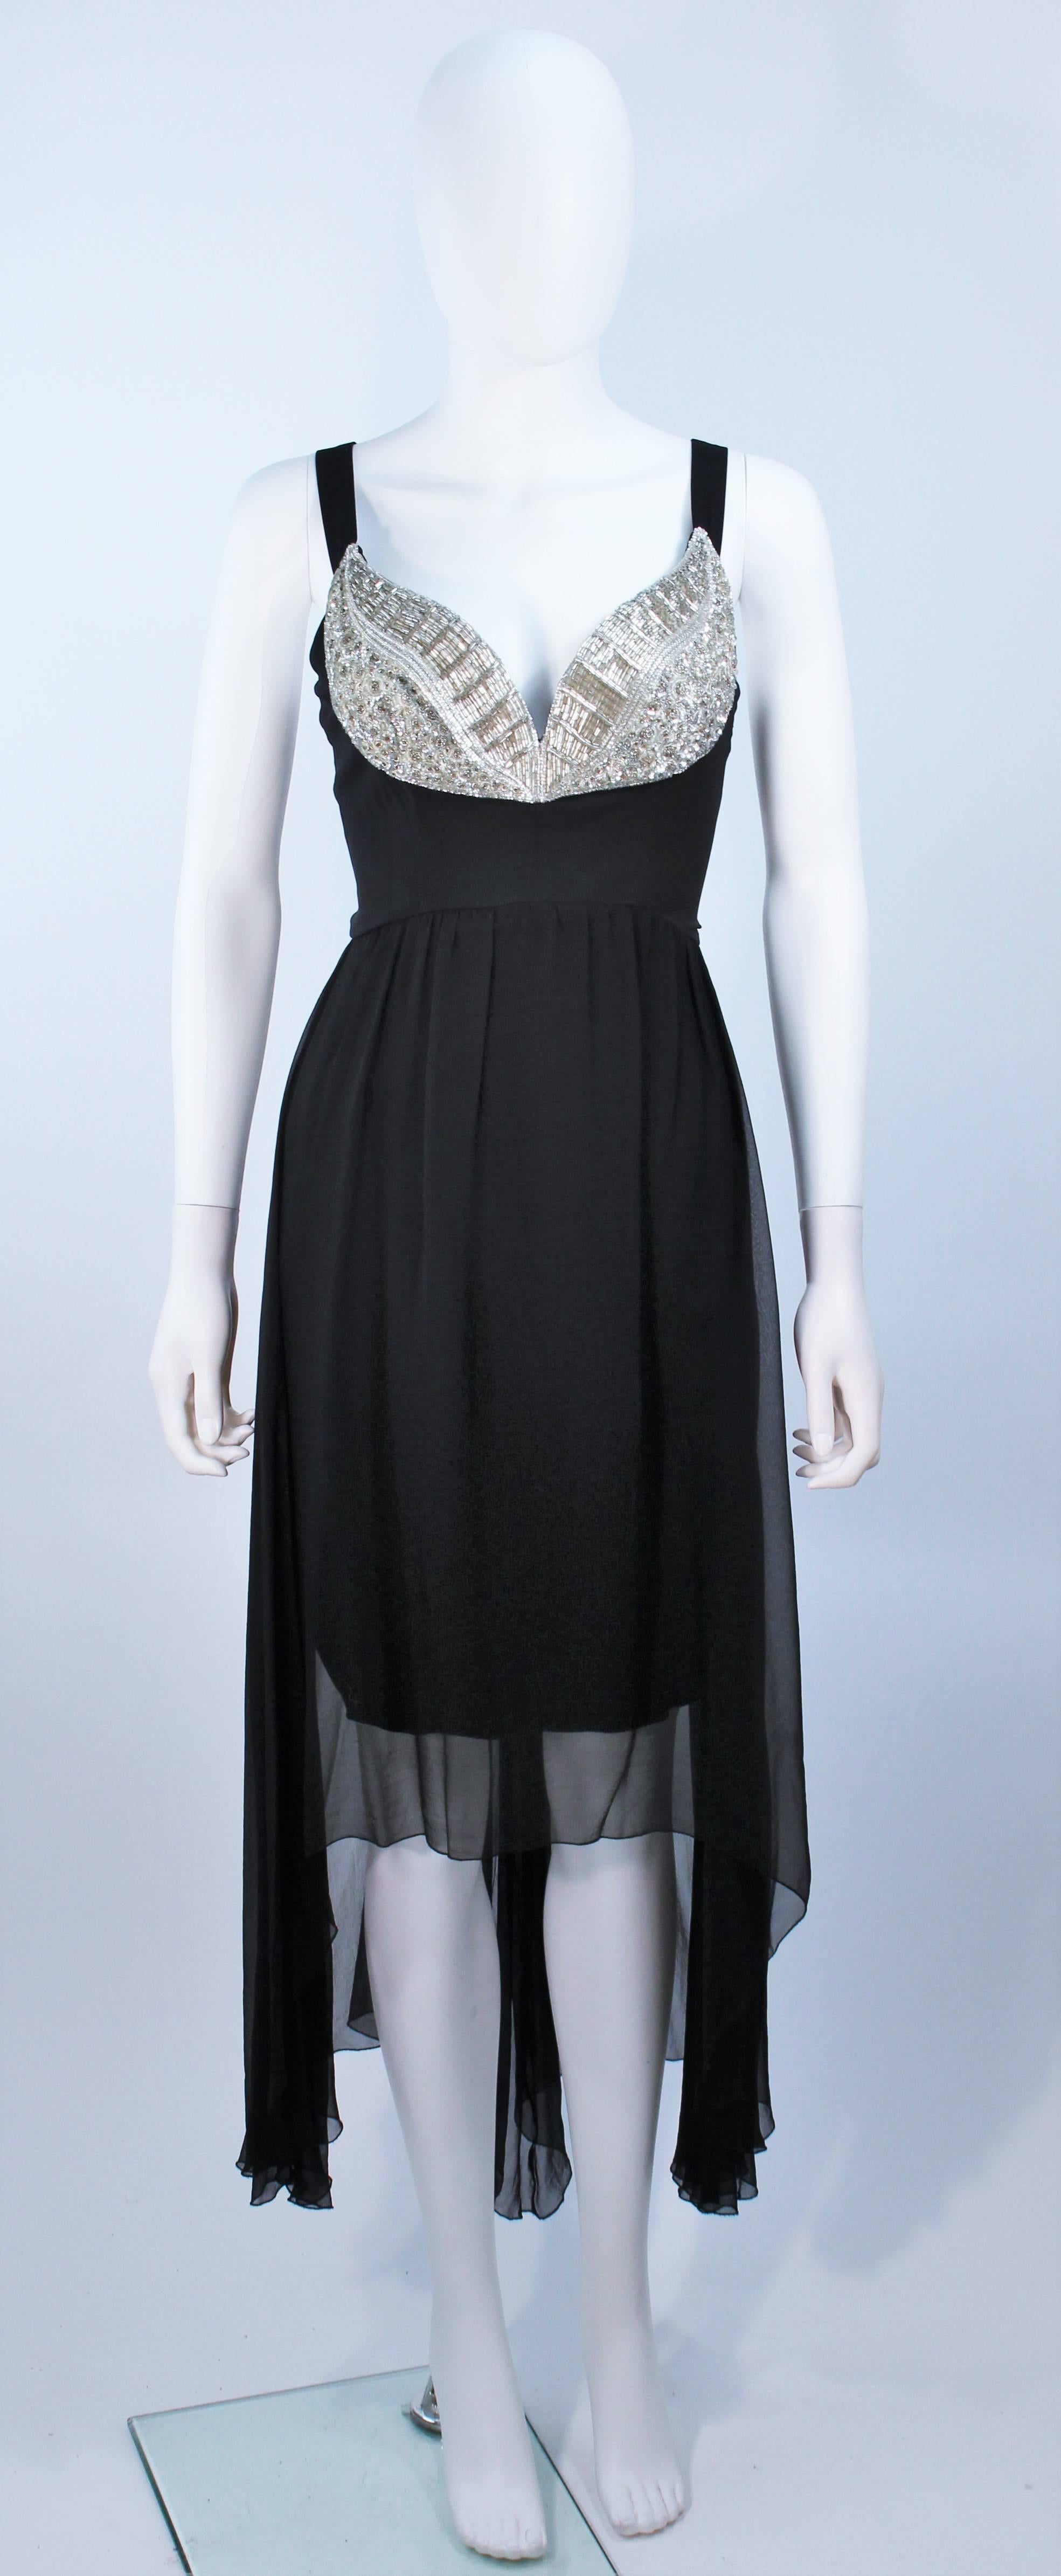  This Karl Lagerfeld  dress is composed of black silk chiffon a top a black stretch silk with an embellished bust applique. There is a center back zipper closure. In excellent vintage condition. 

  **Please cross-reference measurements for